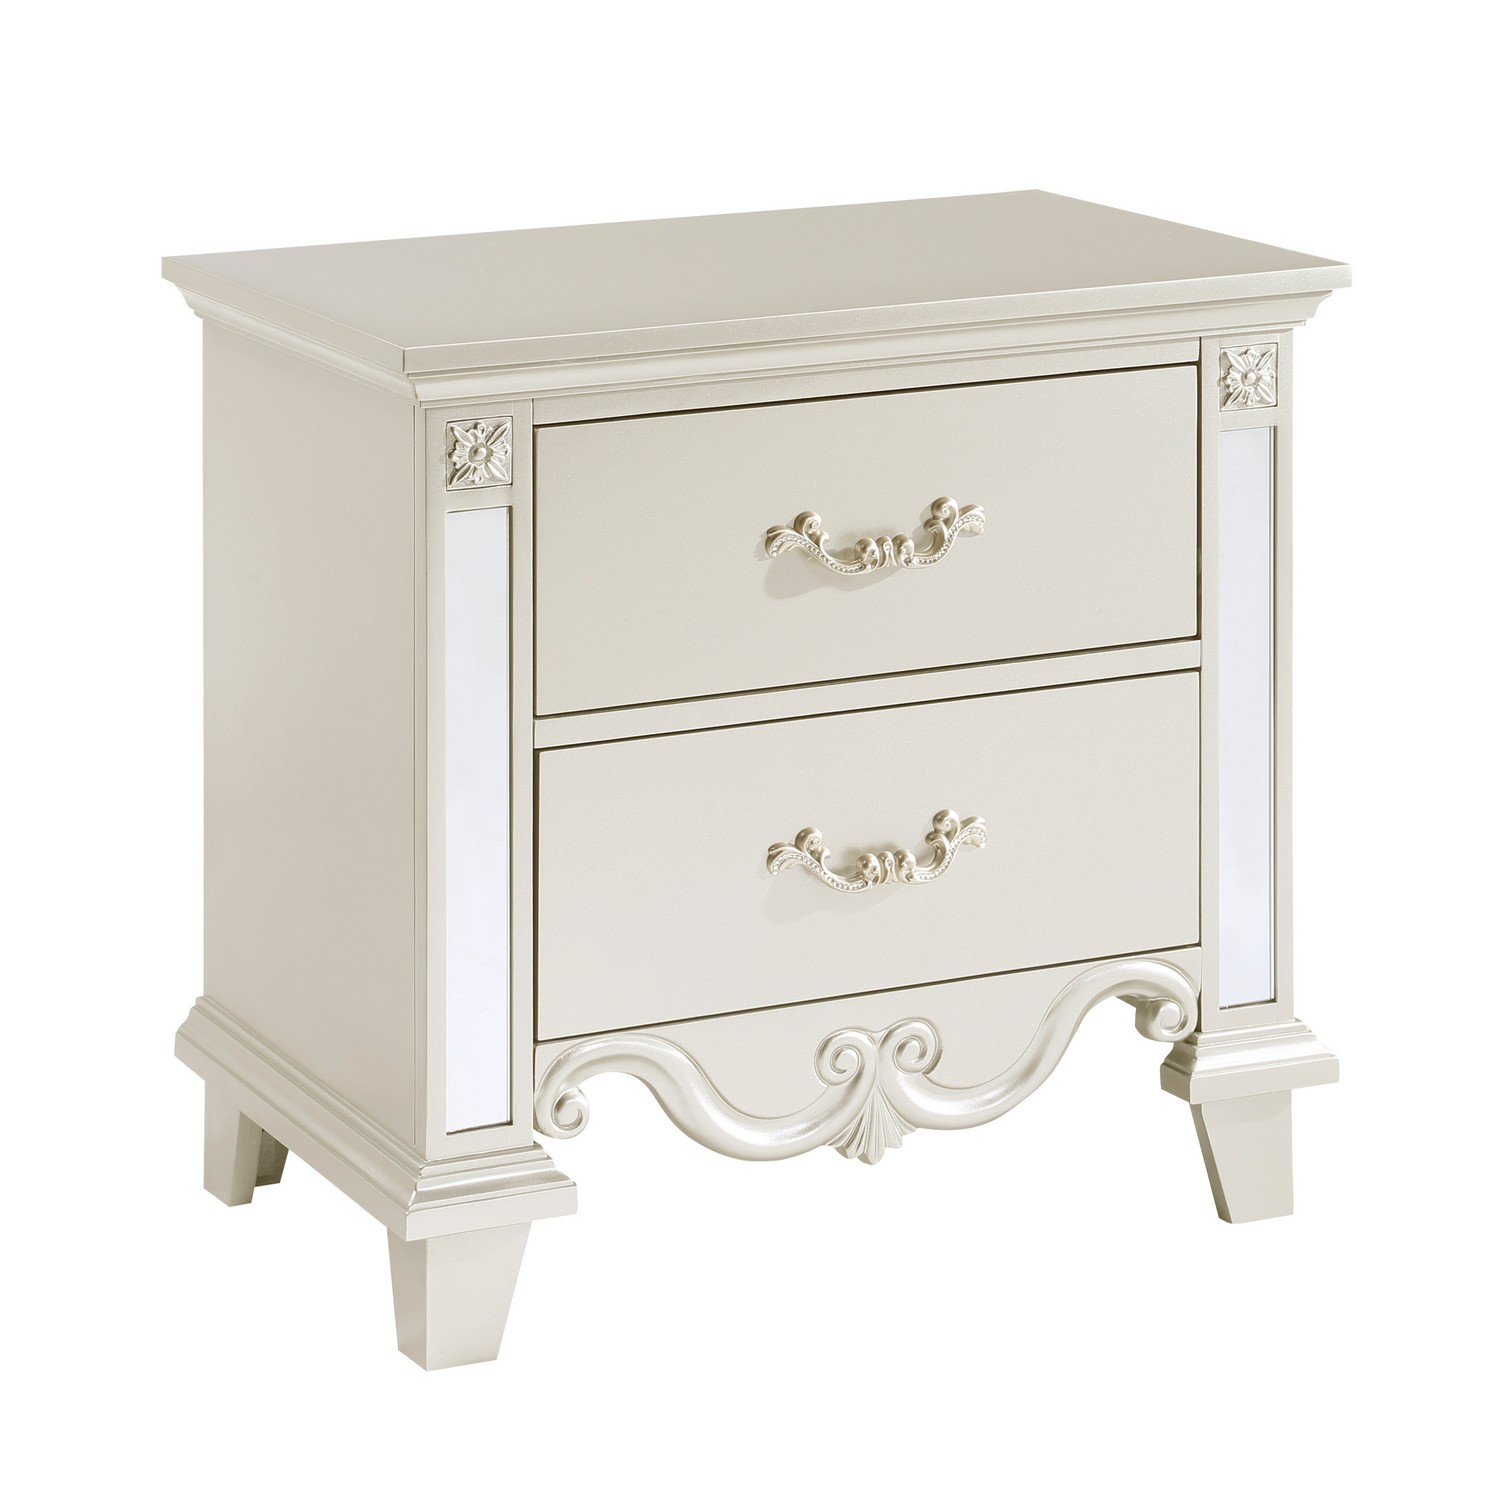 Homelegance Ever Night Stand - Champagne